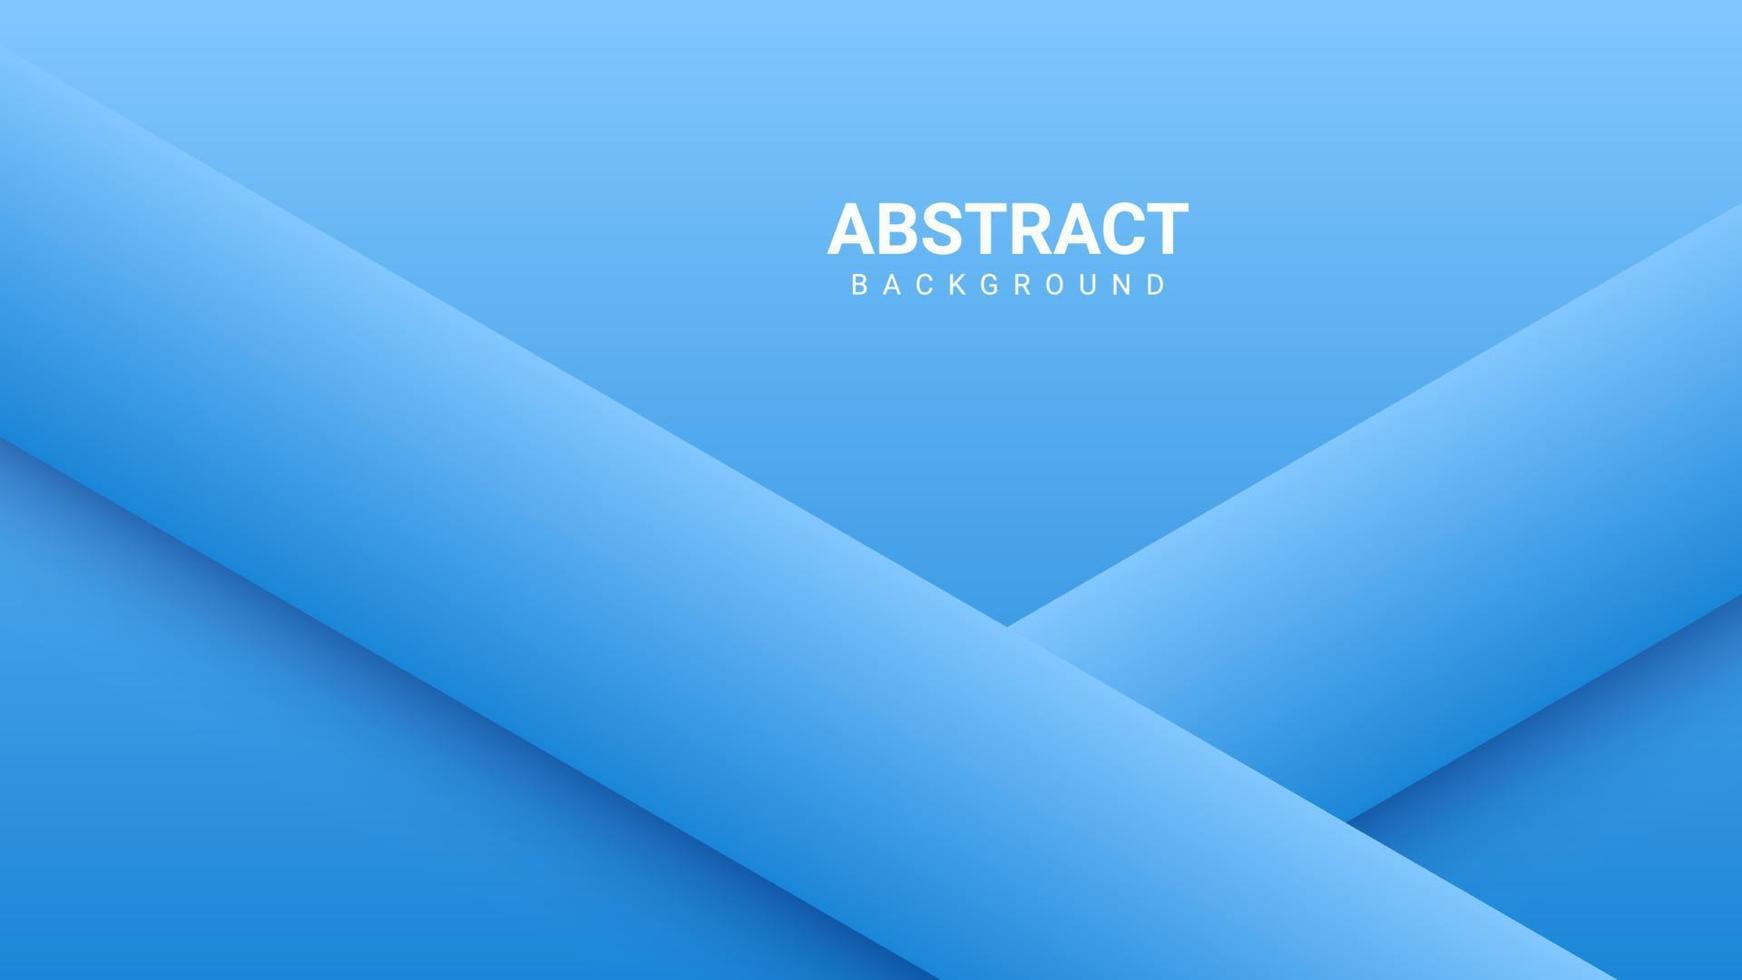 smooth geometric abstract background in light blue vector